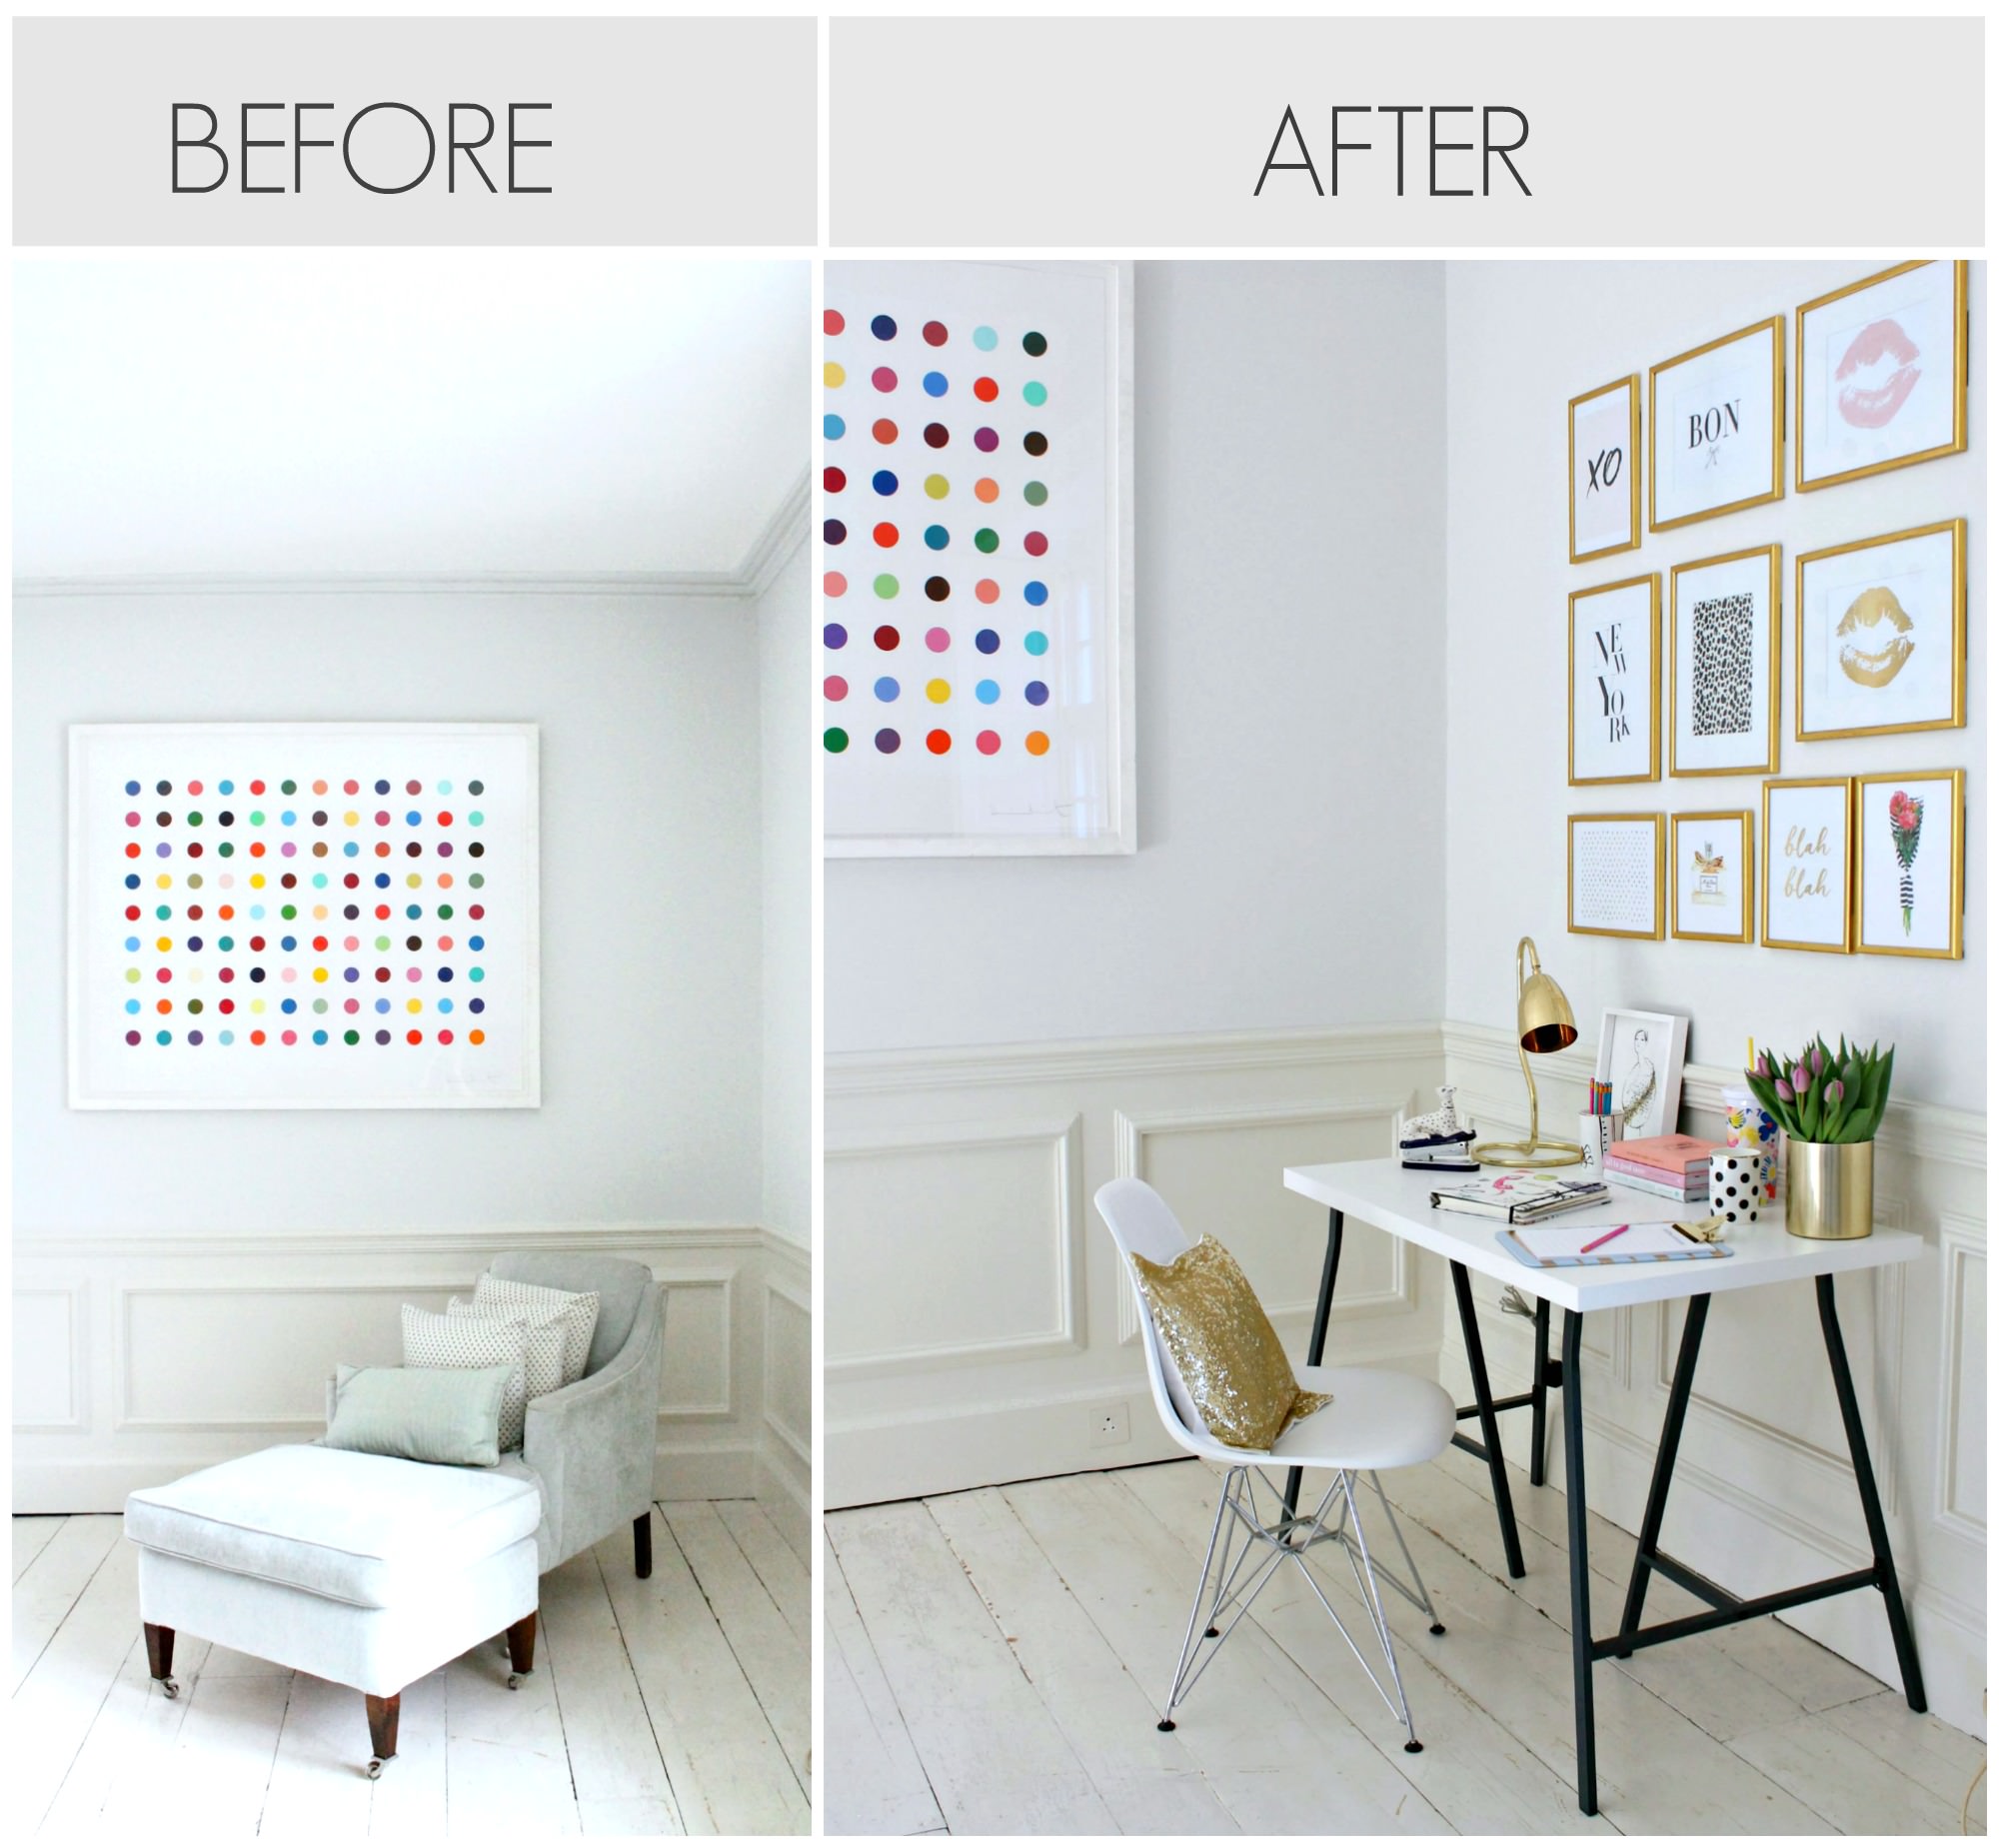 Creating-a-gallery-wall-with-Command-strips-UK-photo-by-Little-Big-Bell